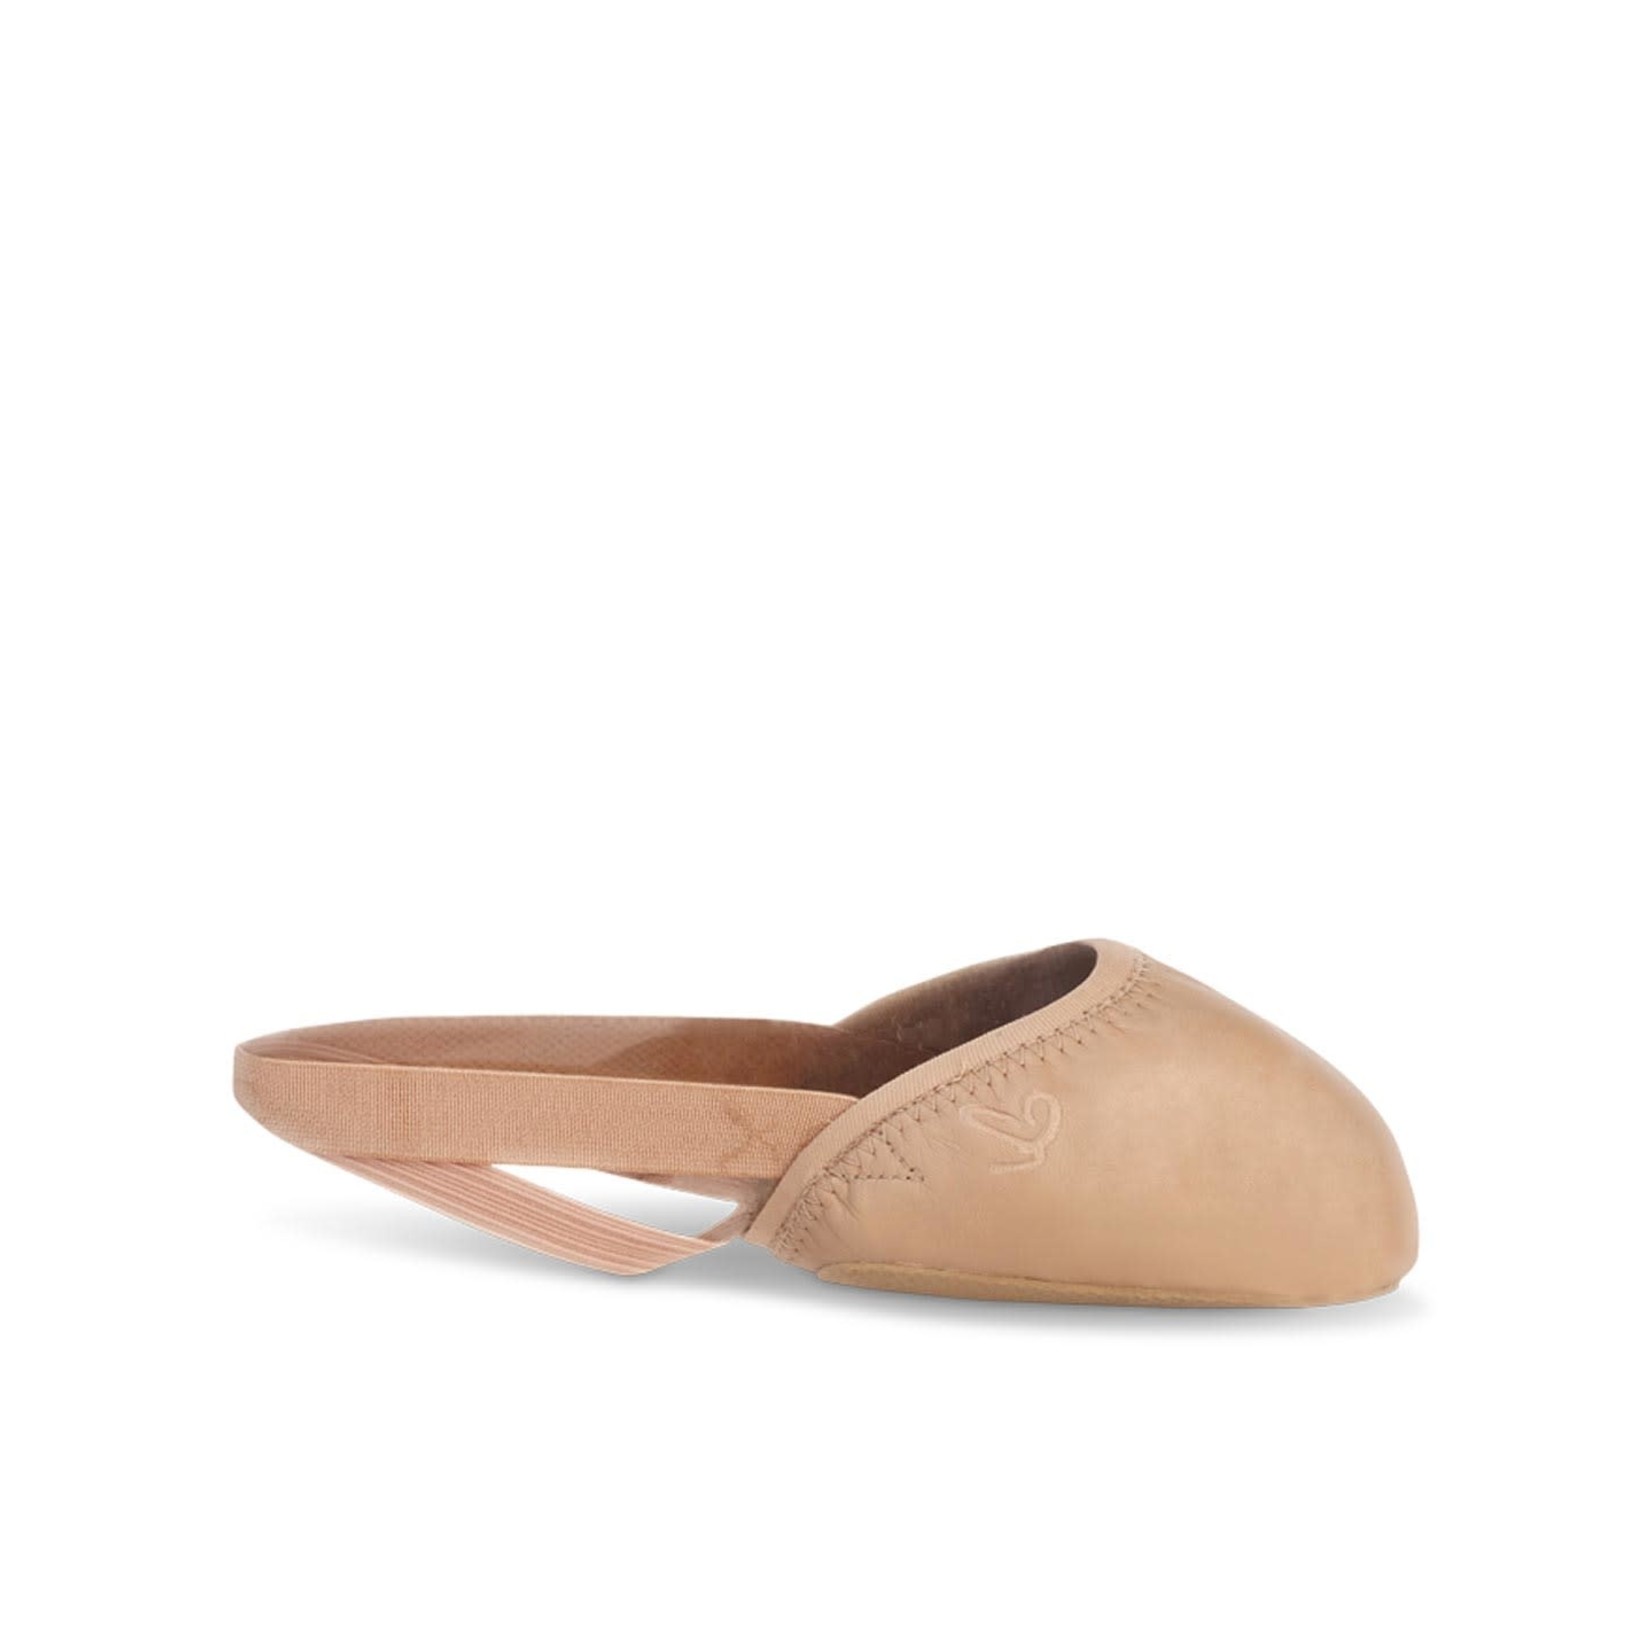 Capezio Adult Turning Pointe 55 by Sophia Lucia